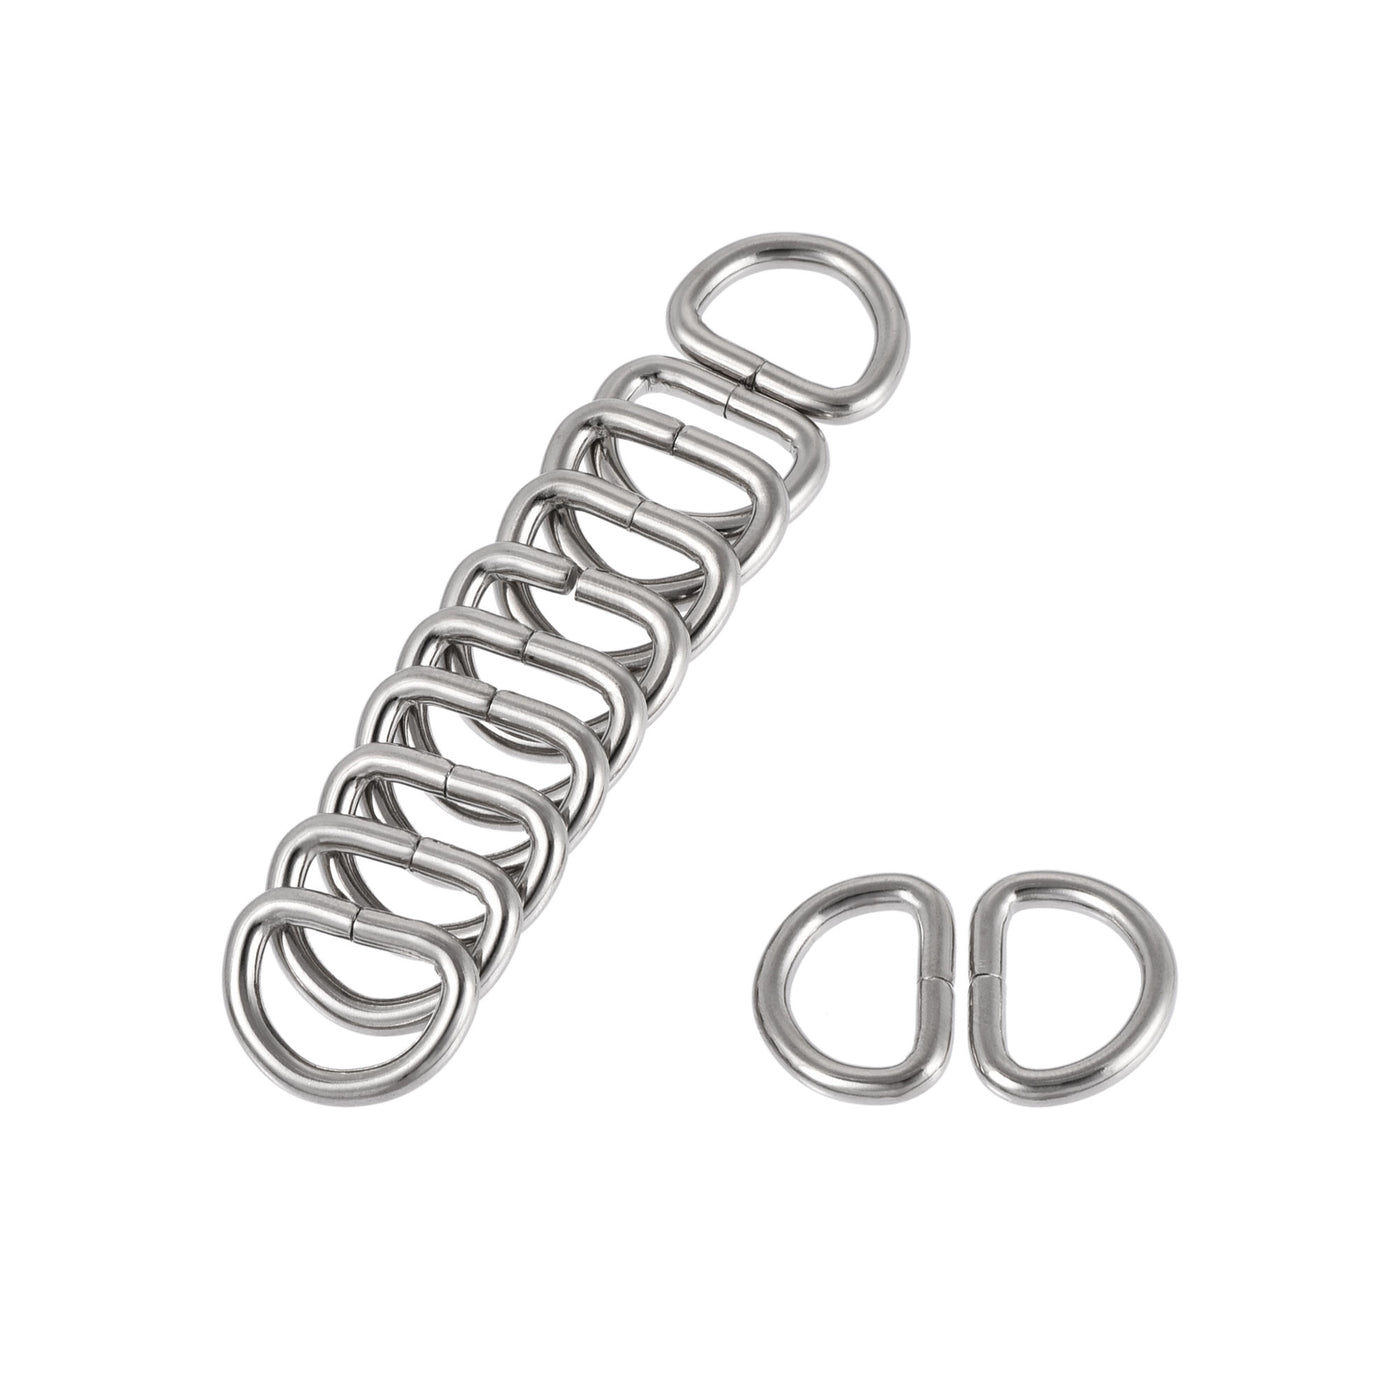 uxcell Uxcell Metal D Ring 0.51"(13mm) D-Rings Buckle for Hardware Bags Belts Craft DIY Accessories Silver Tone 100pcs